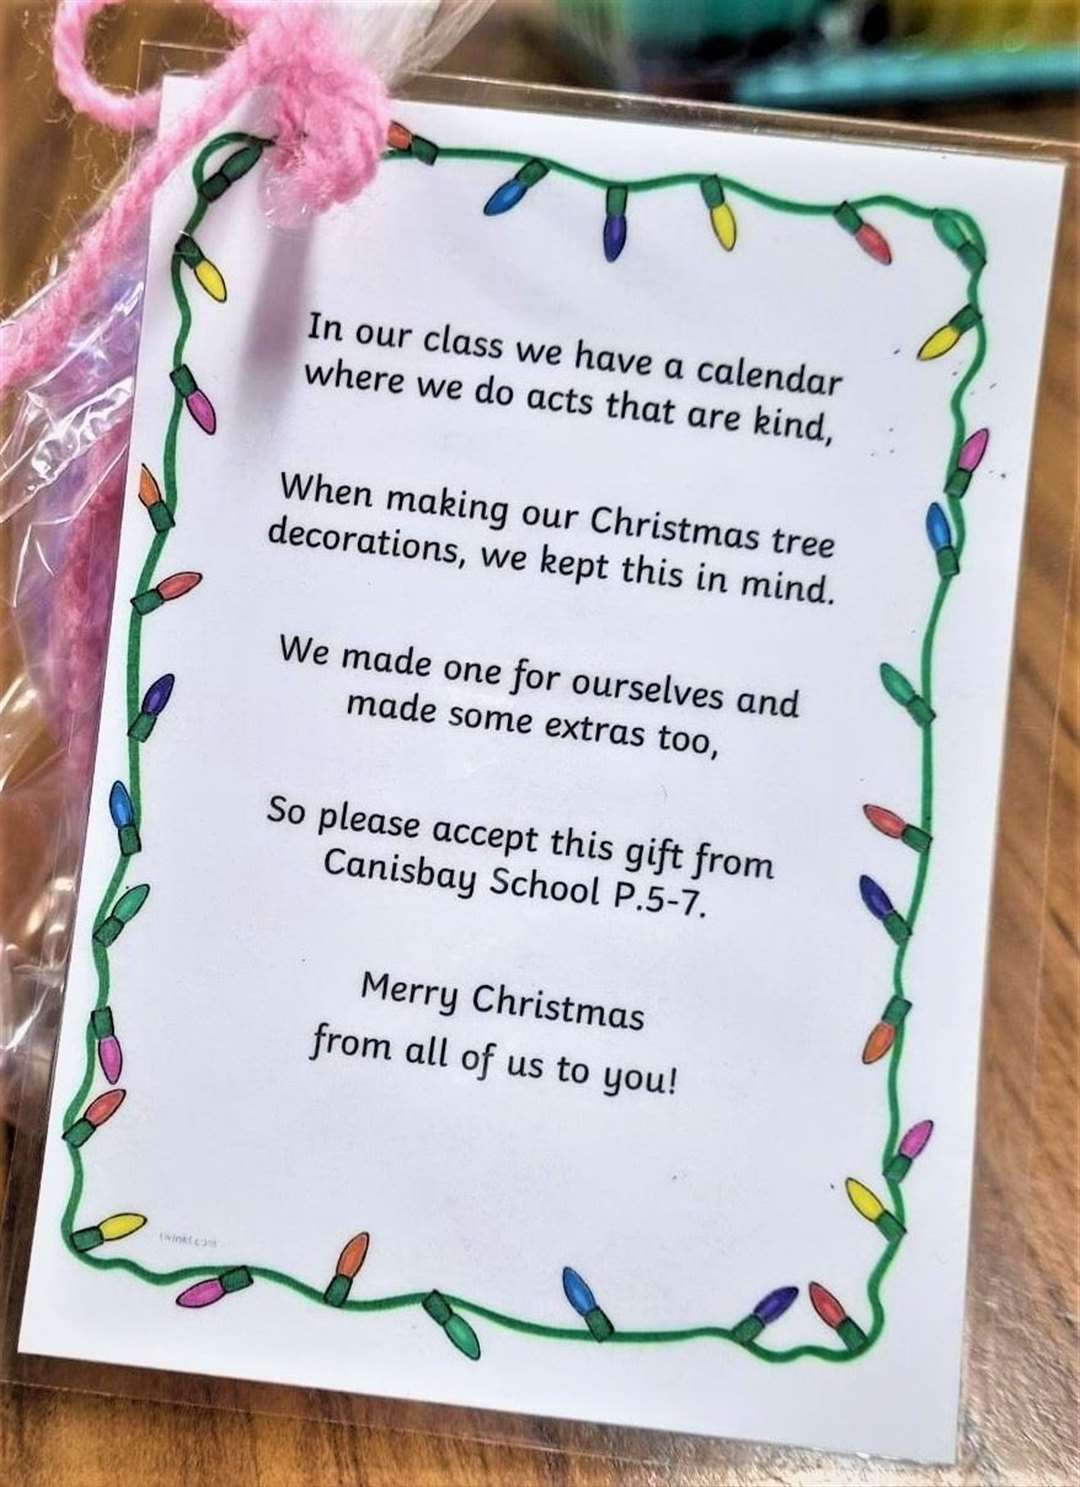 Canisbay Primary School Christmas message